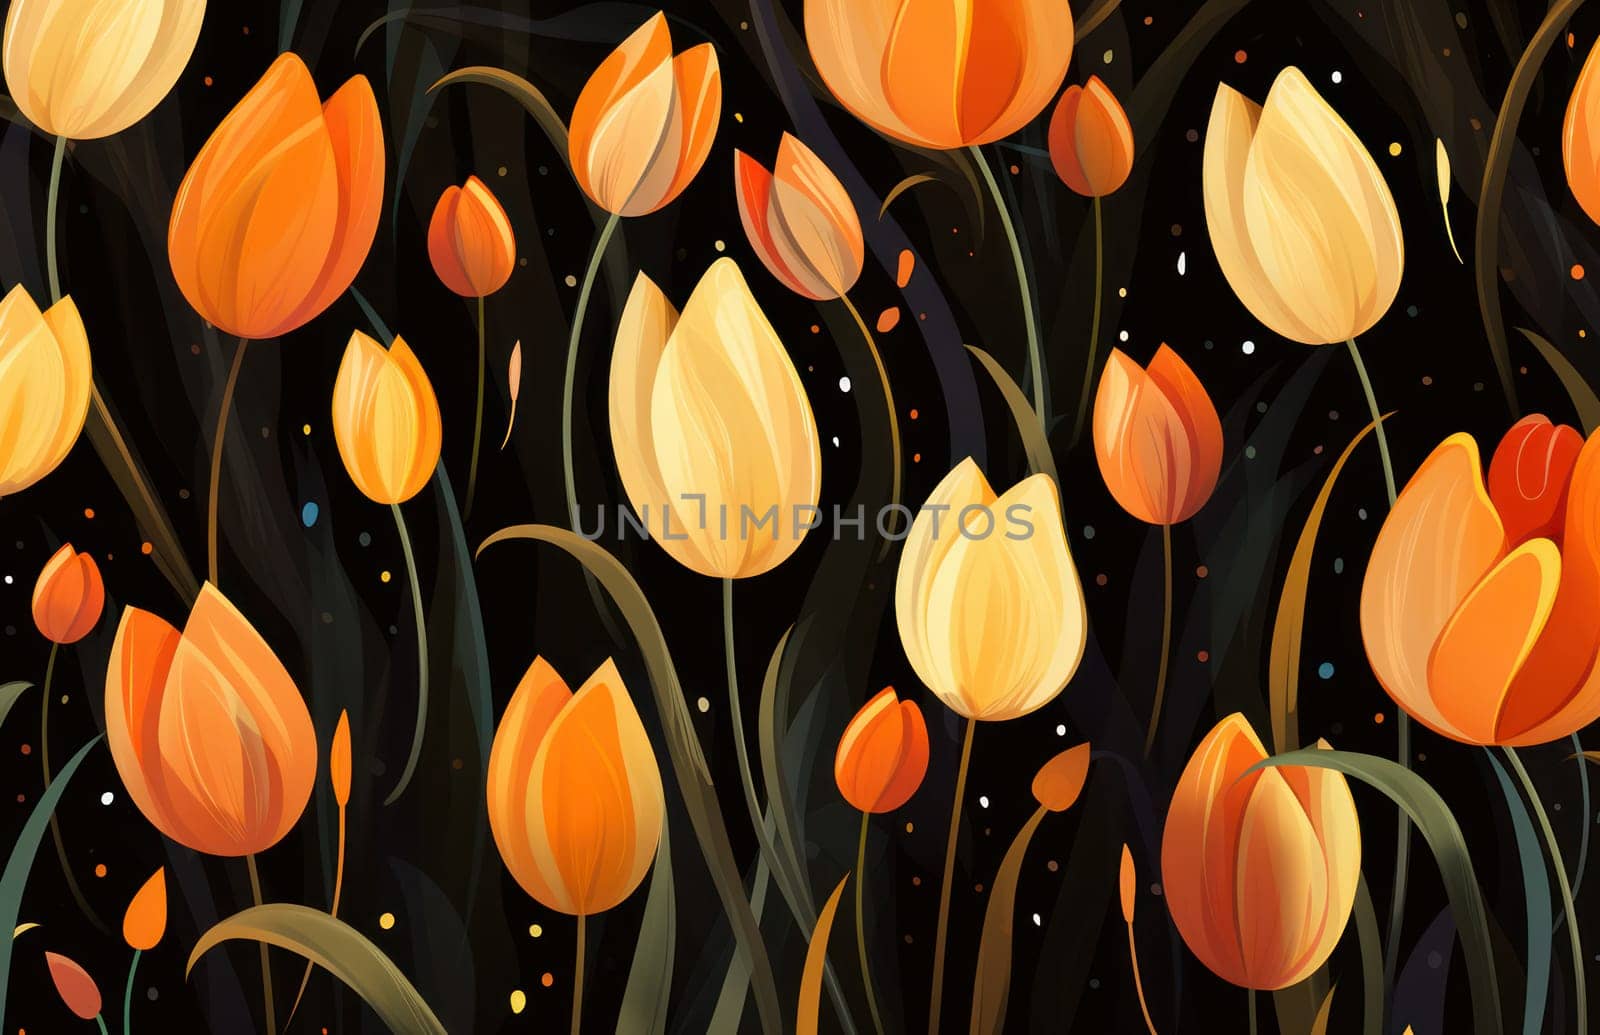 Colorful Floral Elegance: A Vibrant Tulip Bouquet on a Dark Retro Wallpaper with Ornate Floral Patterns